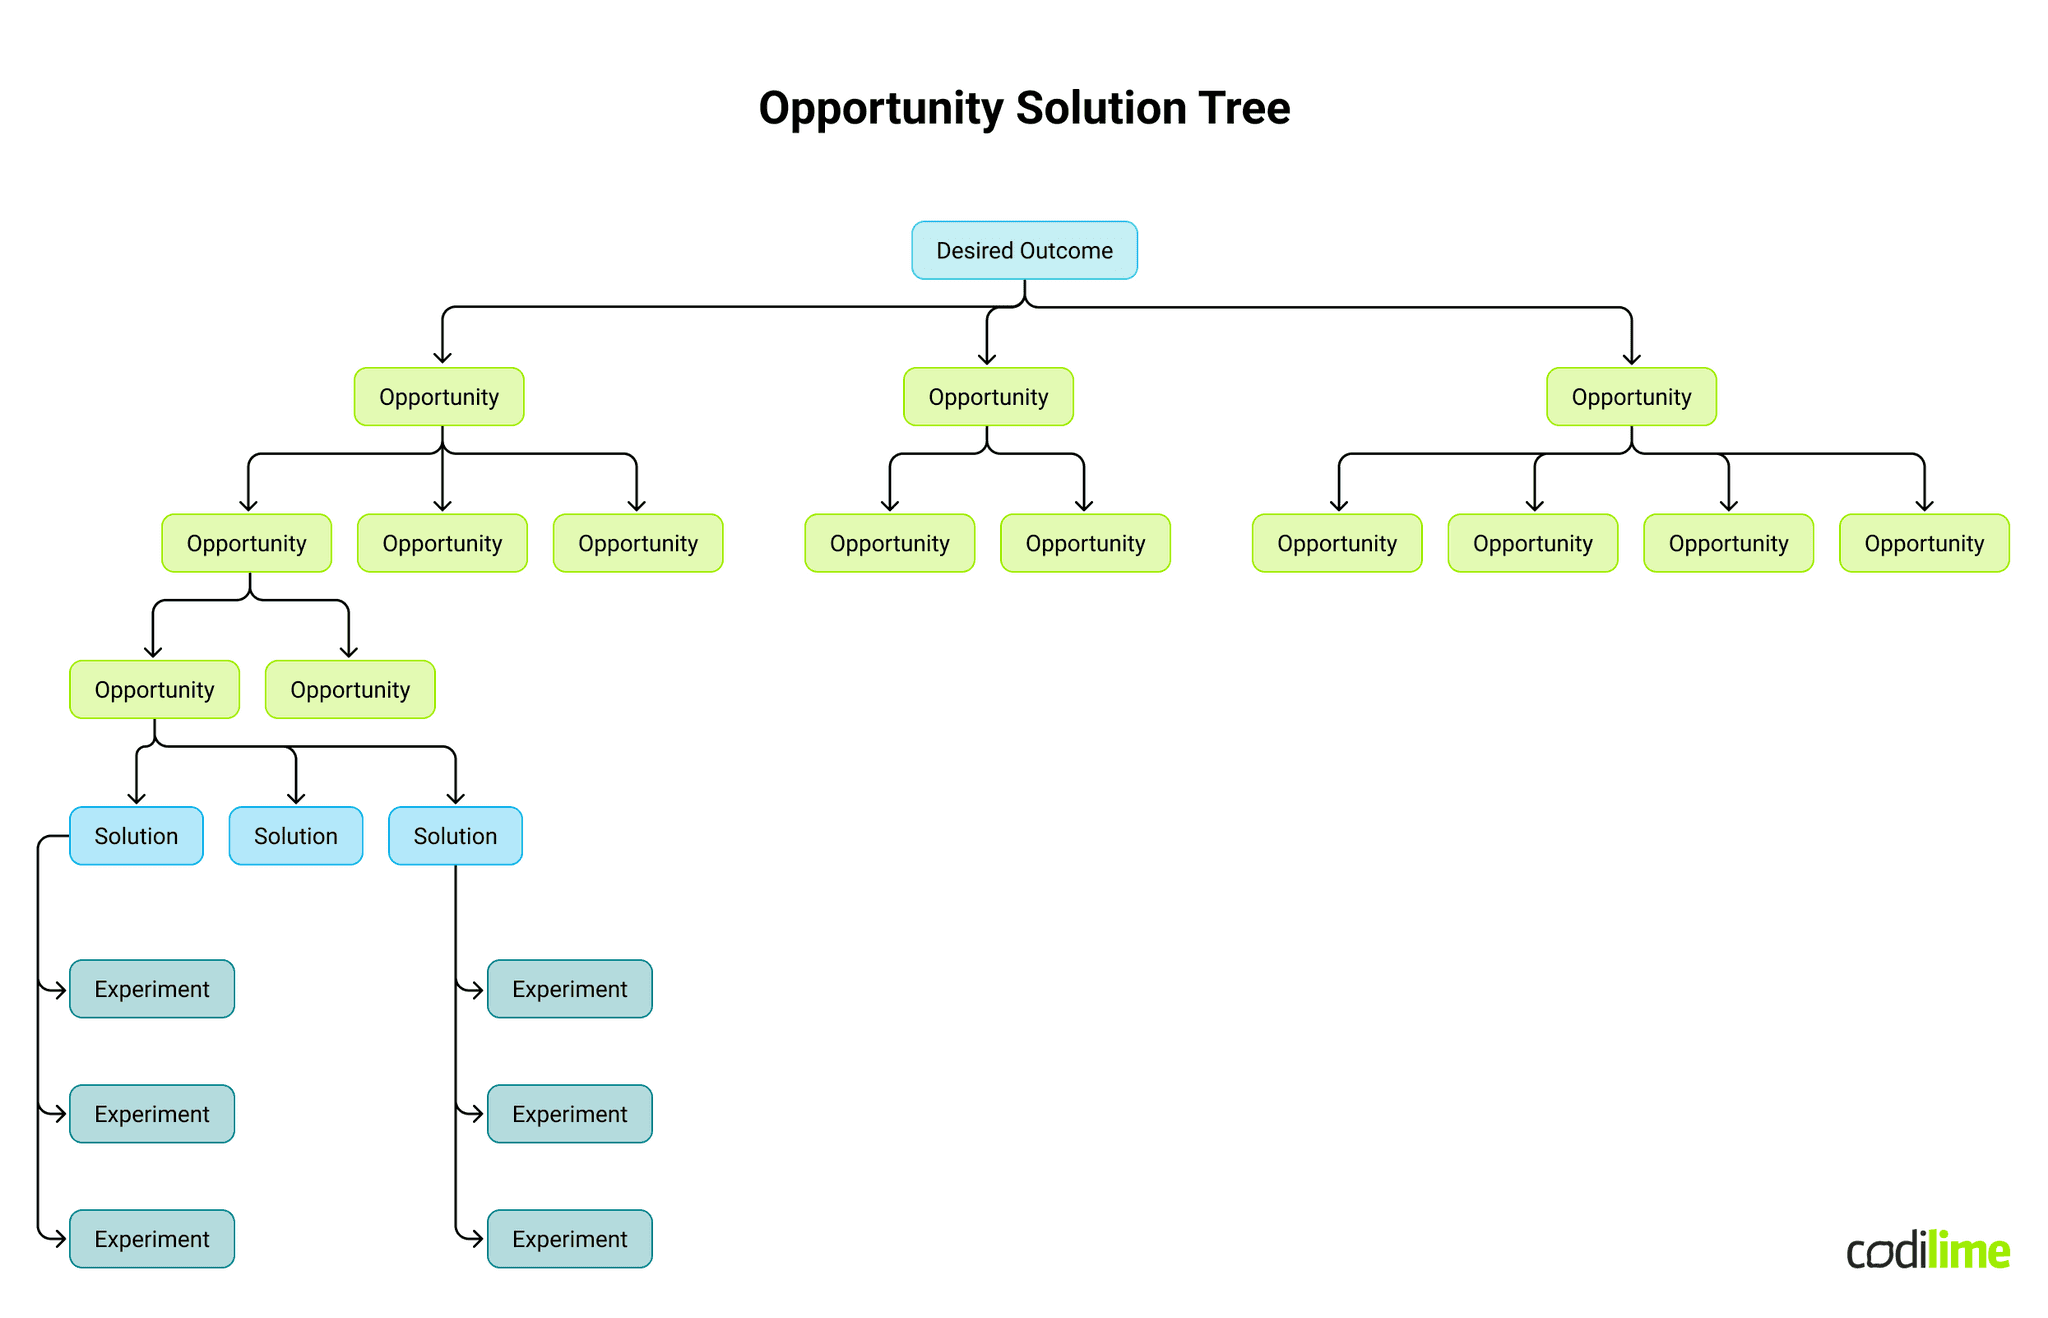 Opportunity solution tree